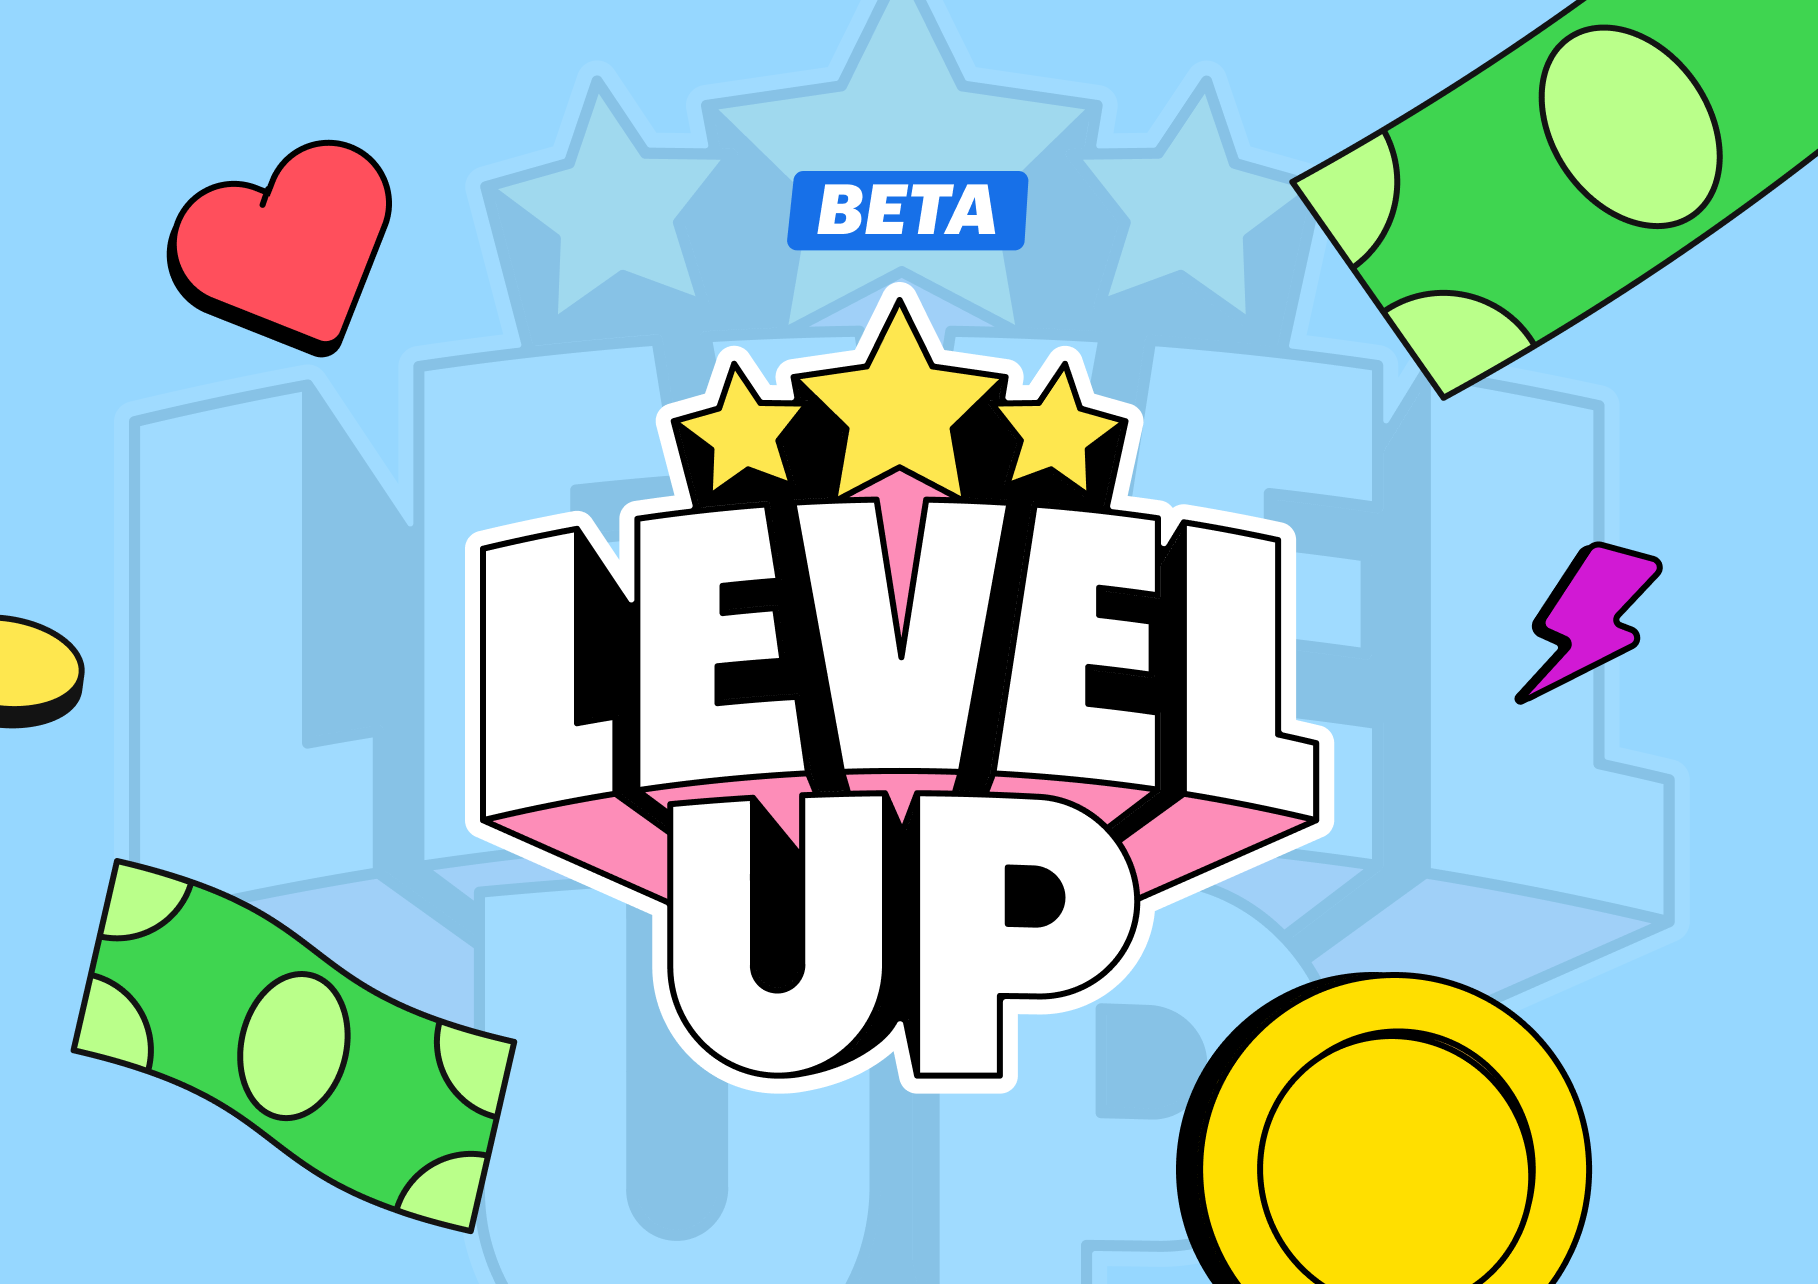 Level_Up_Beta.png